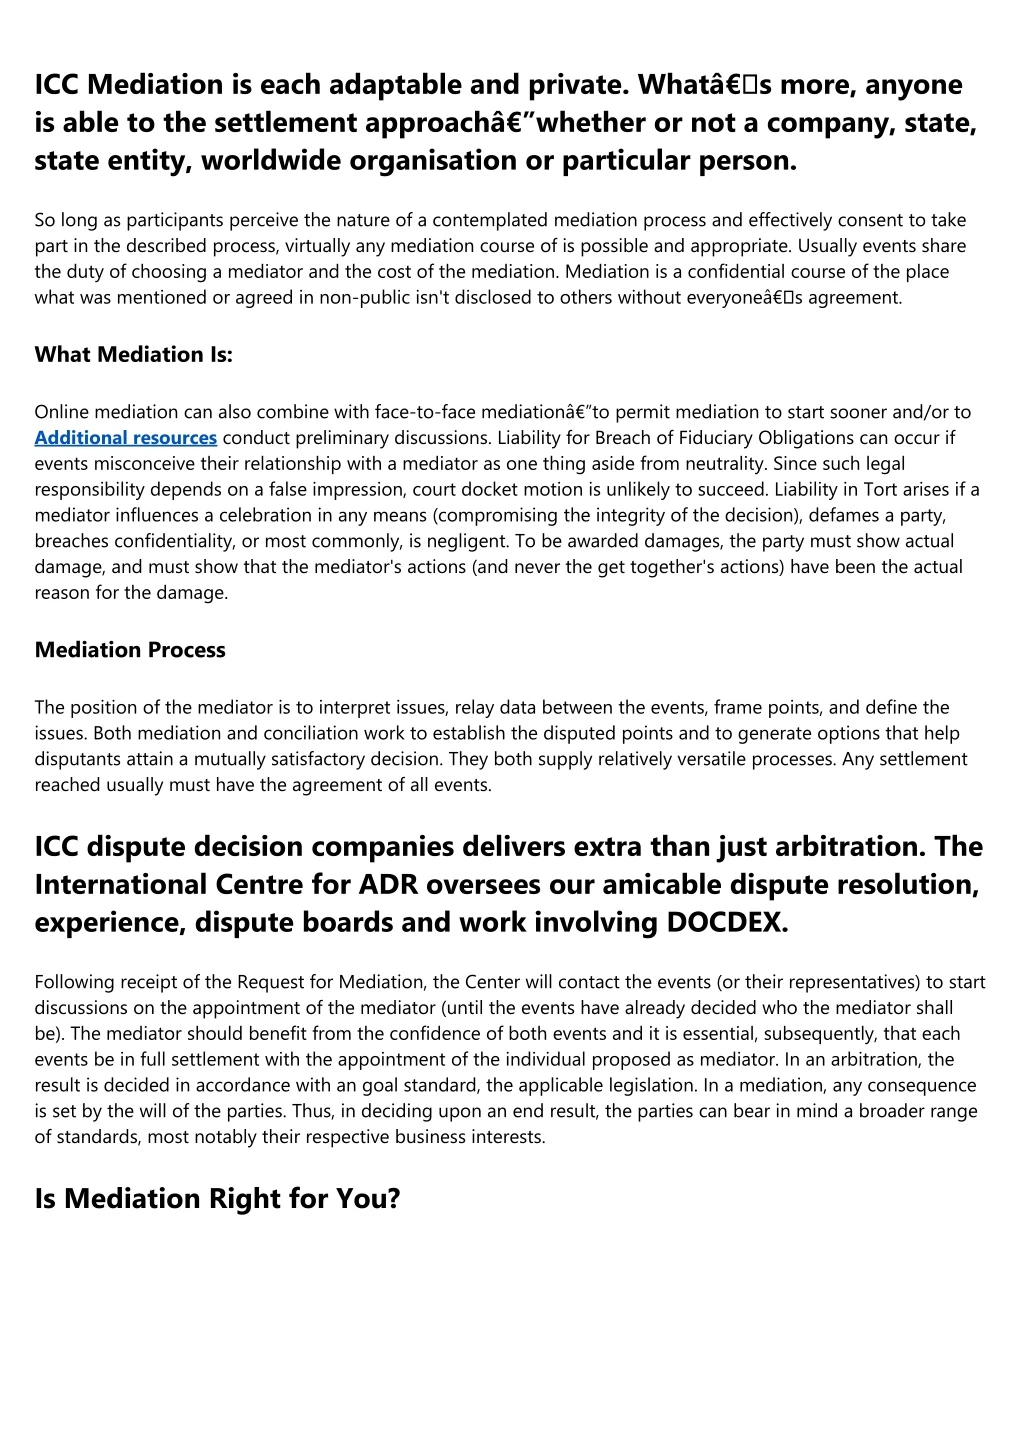 icc mediation is each adaptable and private what